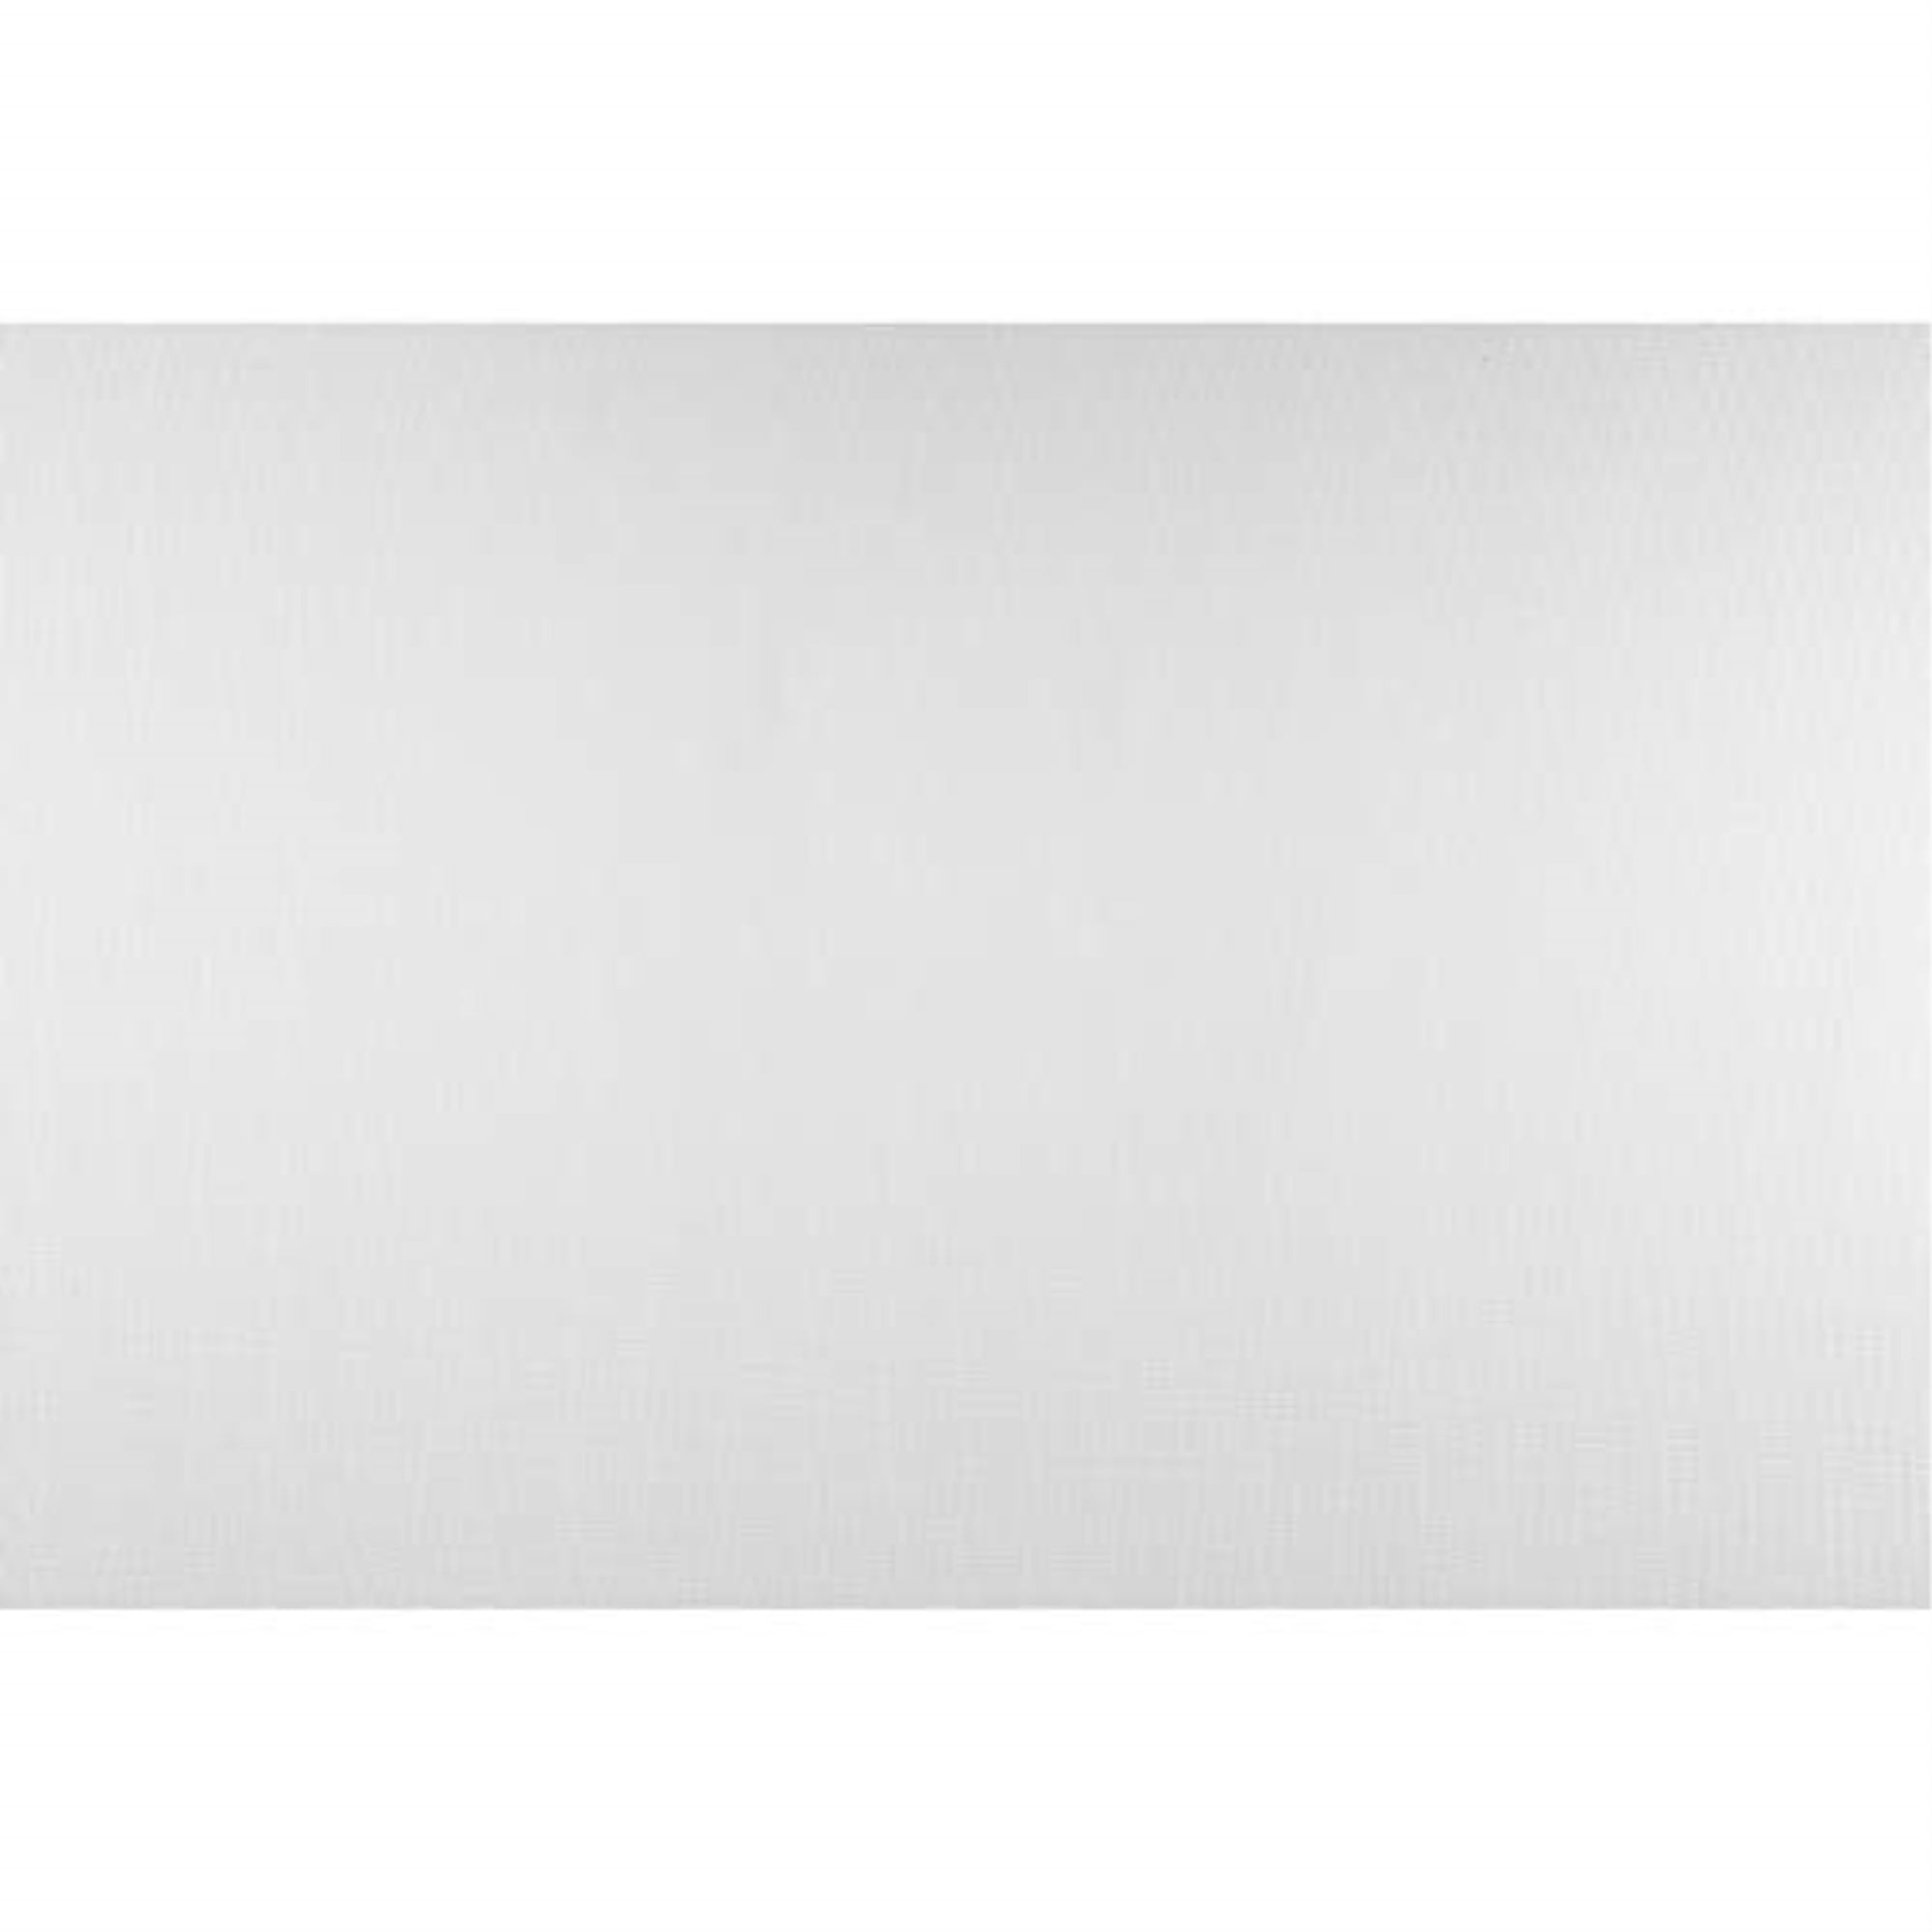 Picture of M-D Building Products 5020354 36 in. x 25 ft. Brite Aluminum Door & Window Screen - Pack of 4